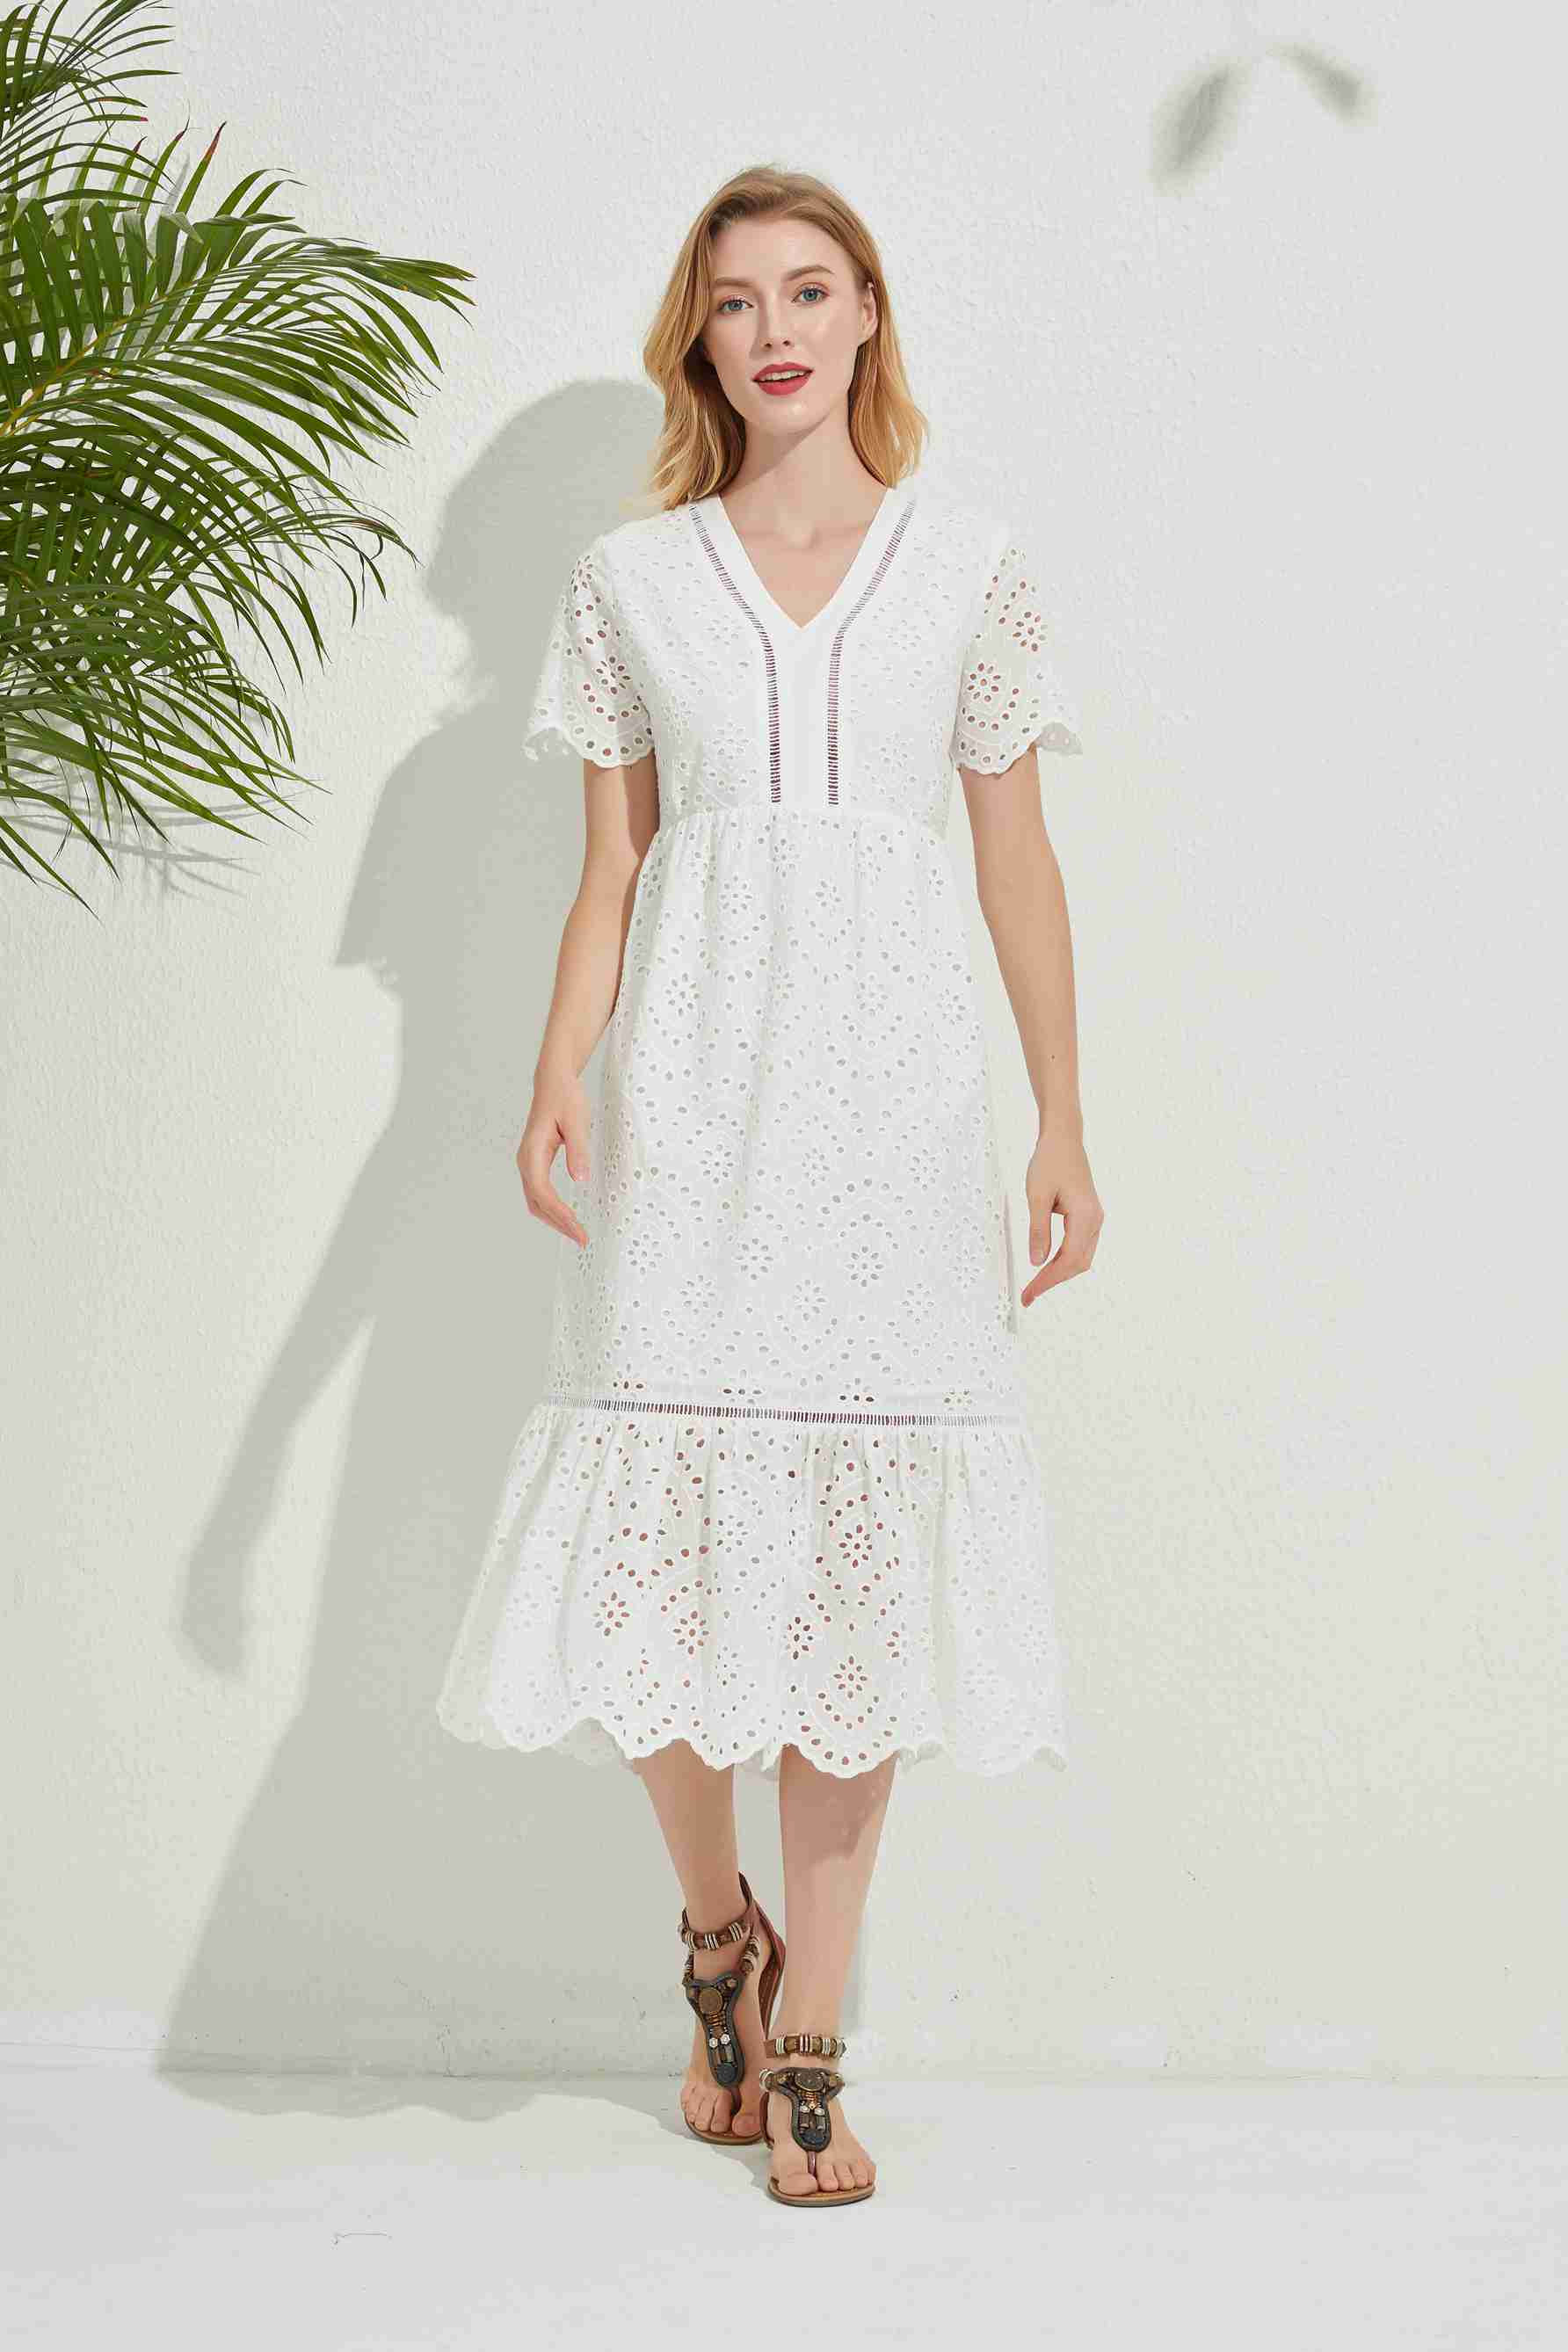 Women's white lace large V-neck hollow splicing Short Sleeve Dress